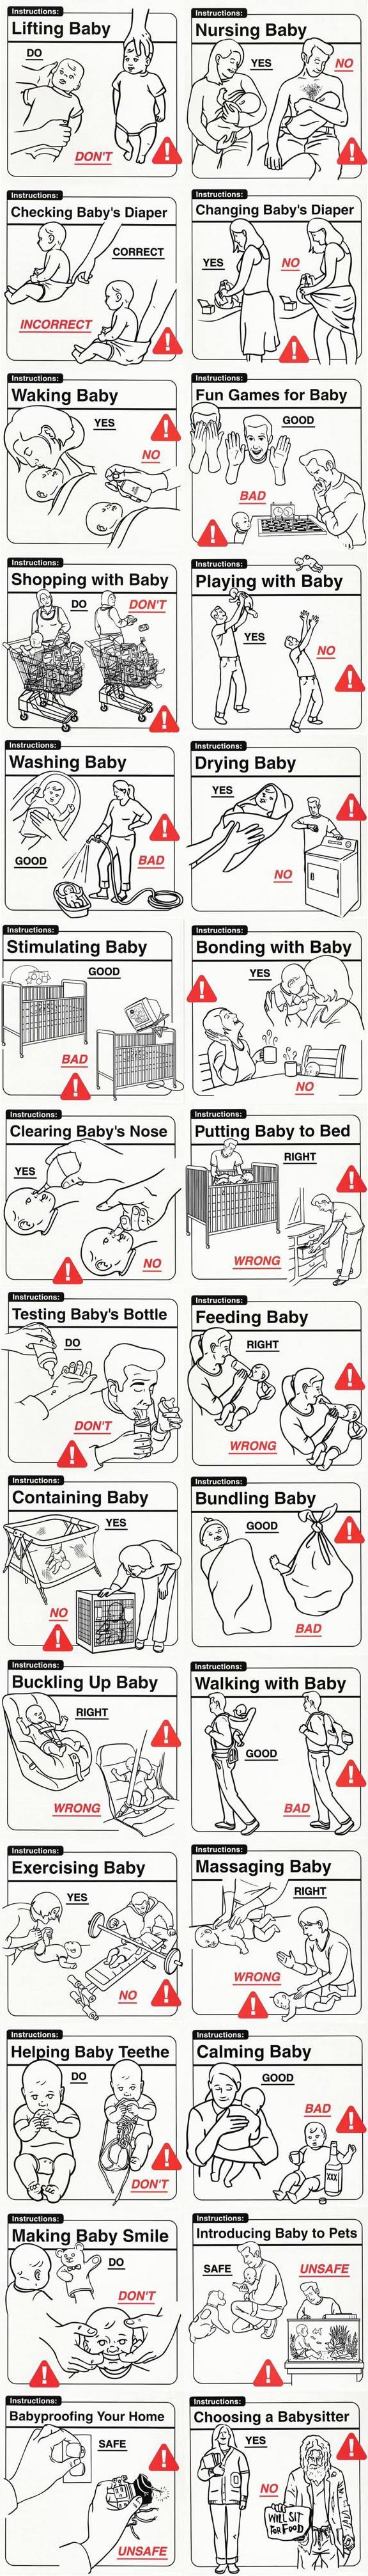 How to take care of your baby